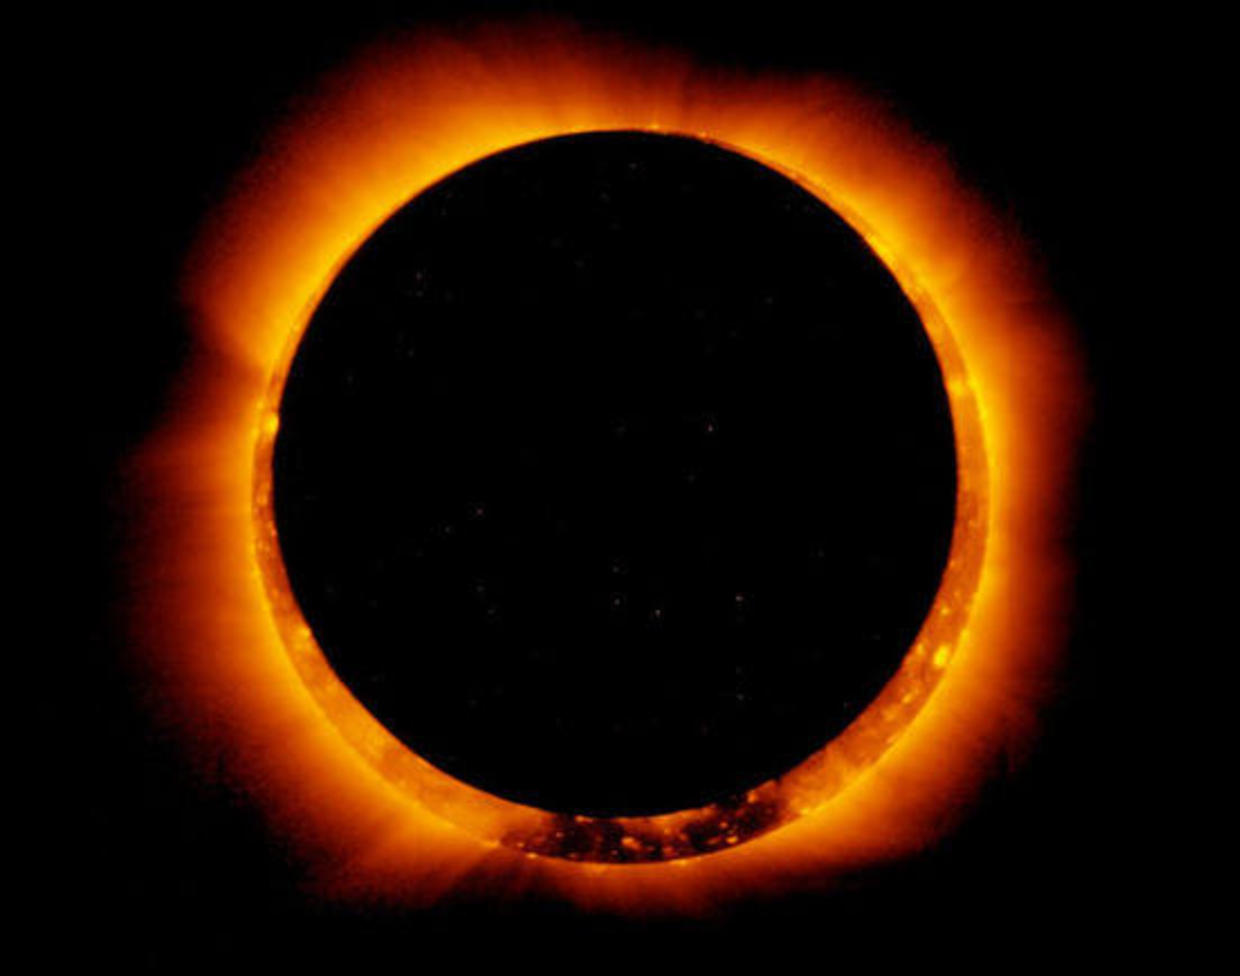 The most famous solar eclipses in history